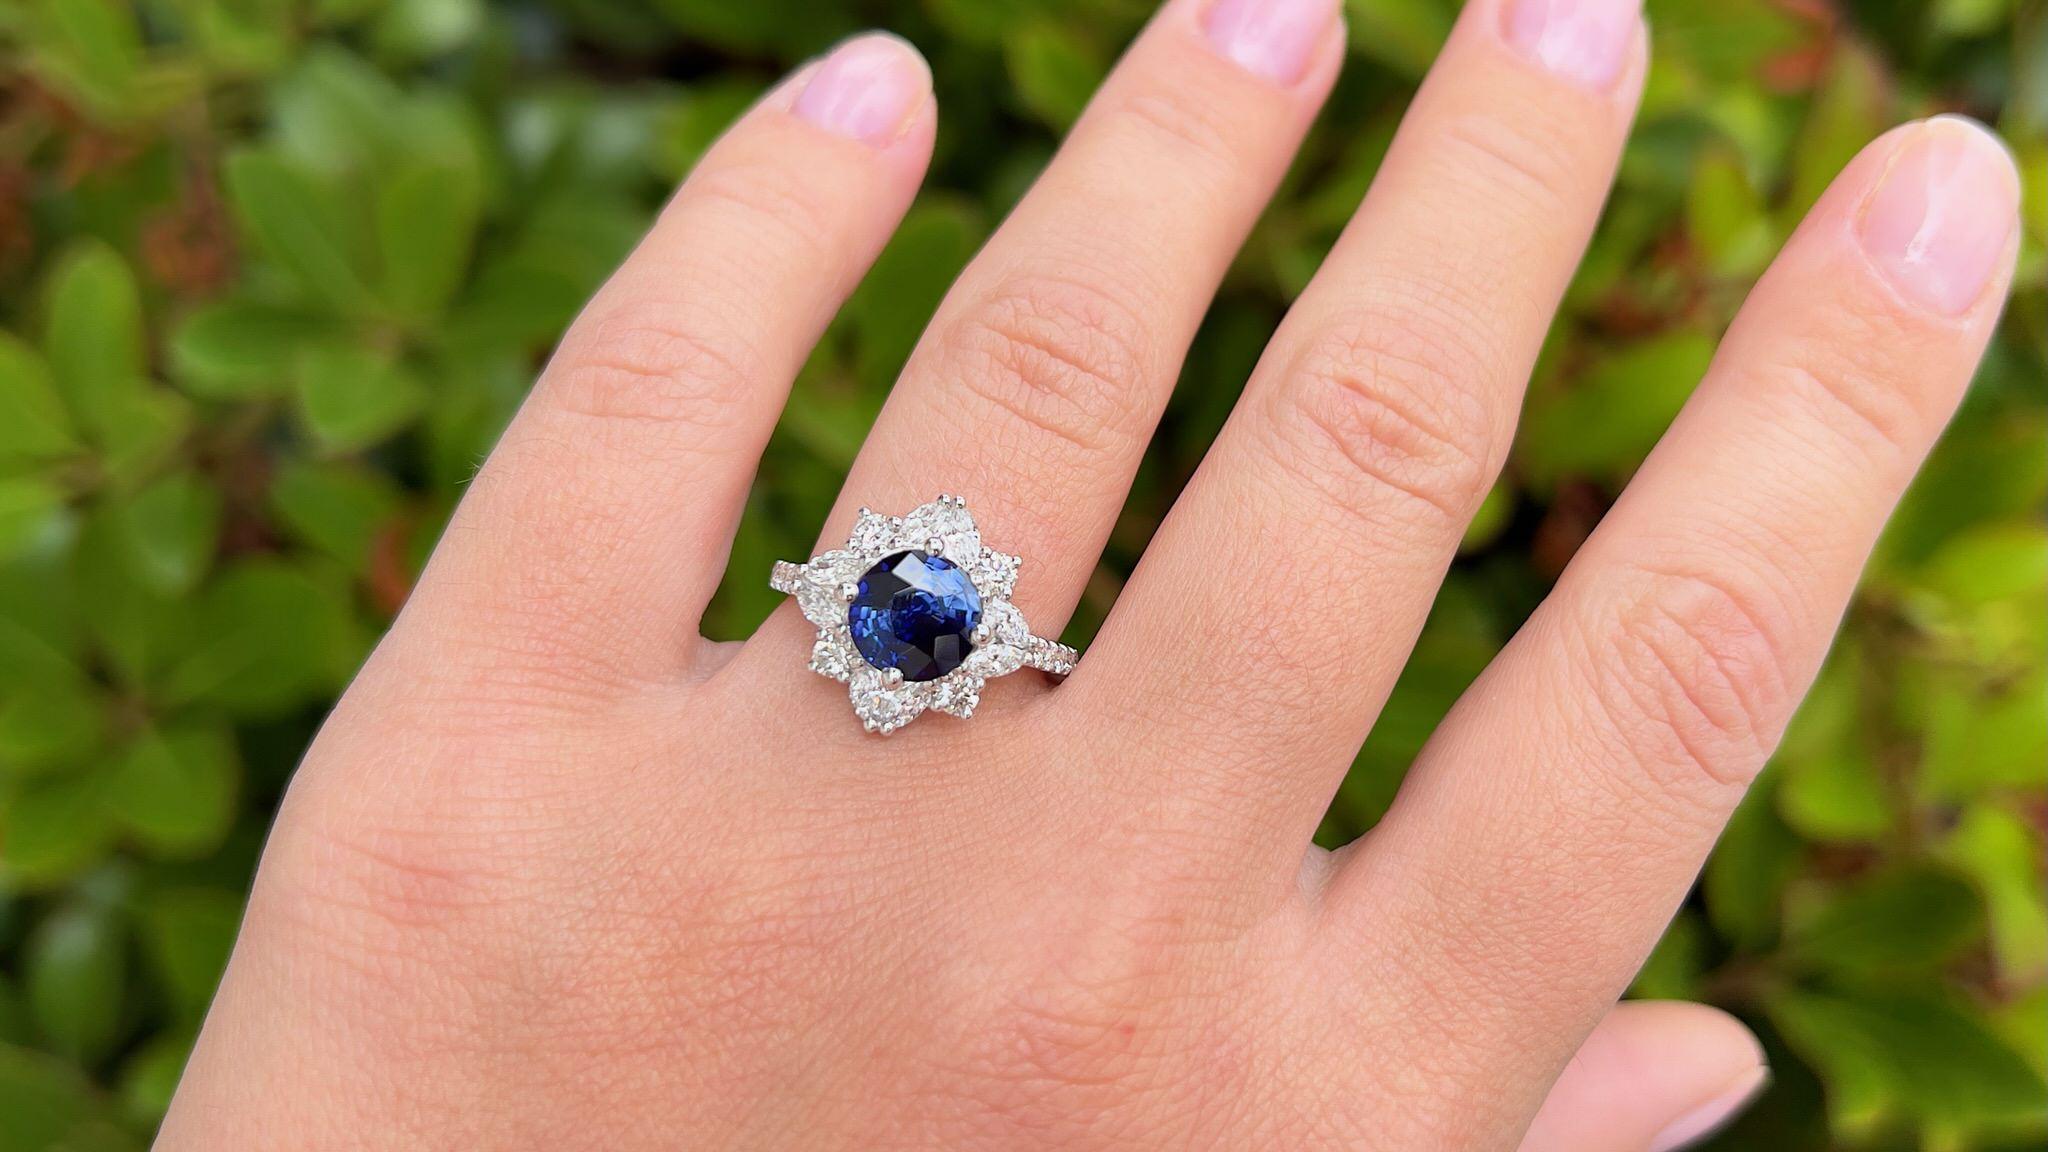 Very Fine Burma Sapphire = 2.08 Carat
Diamonds = 1.10 Carats
(Color: E, Clarity: VS)
Metal: 18K White Gold
Ring Size: 6.5 US
Jewelry Gift Box Included